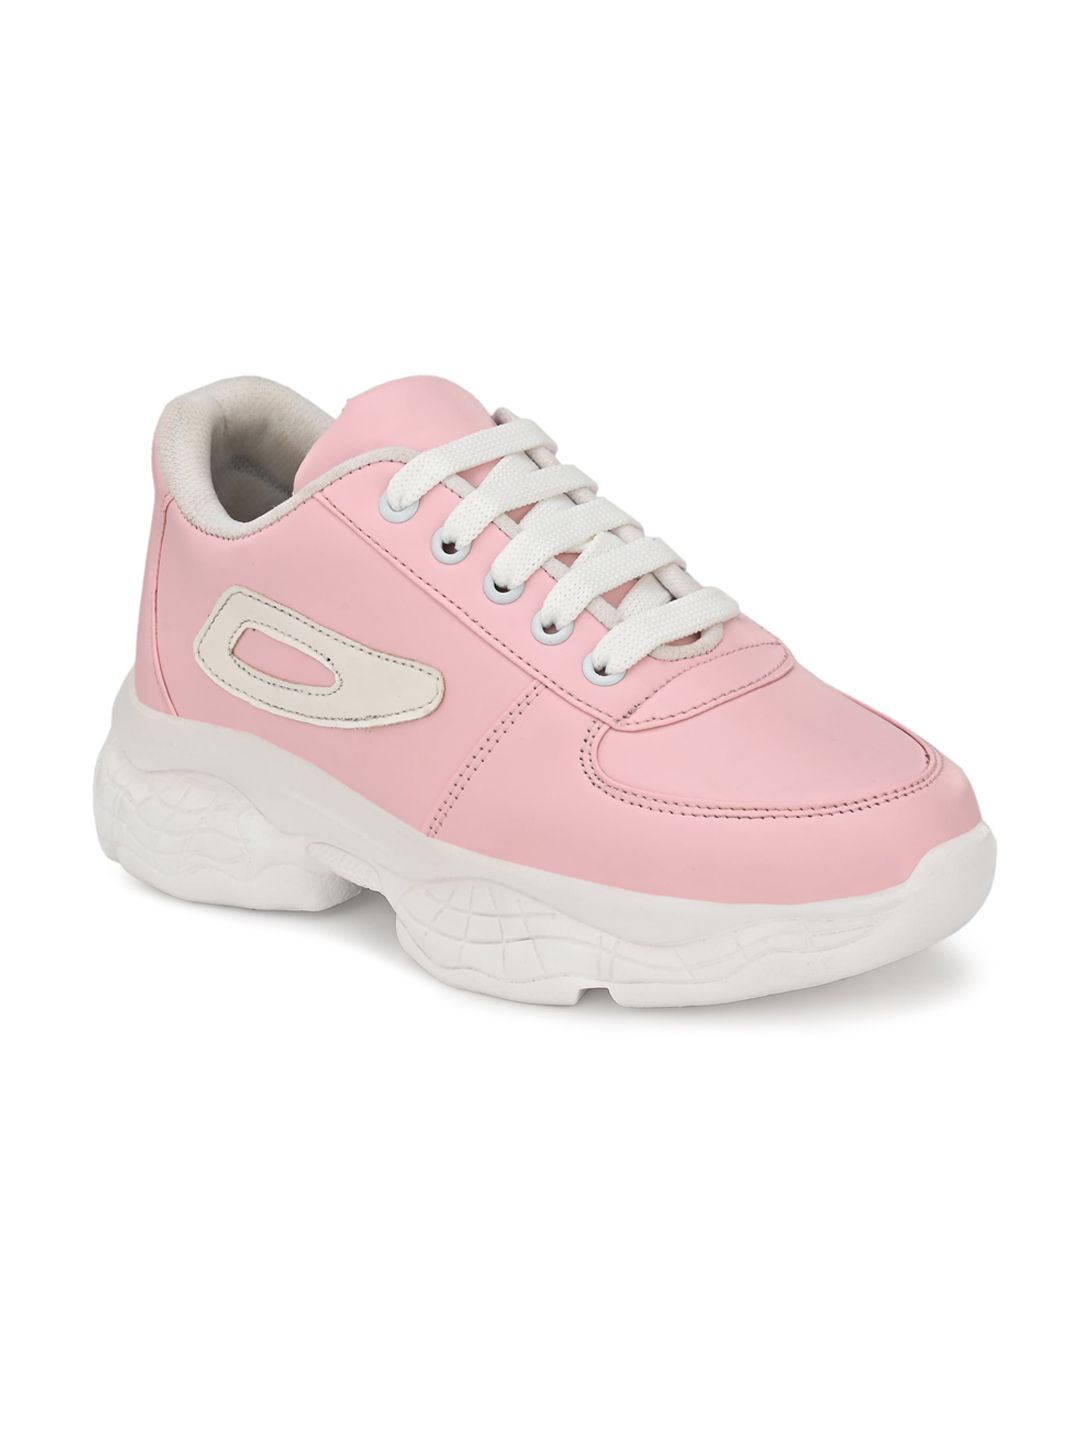 BOOTCO Women Pink Colourblocked Sneakers Price in India